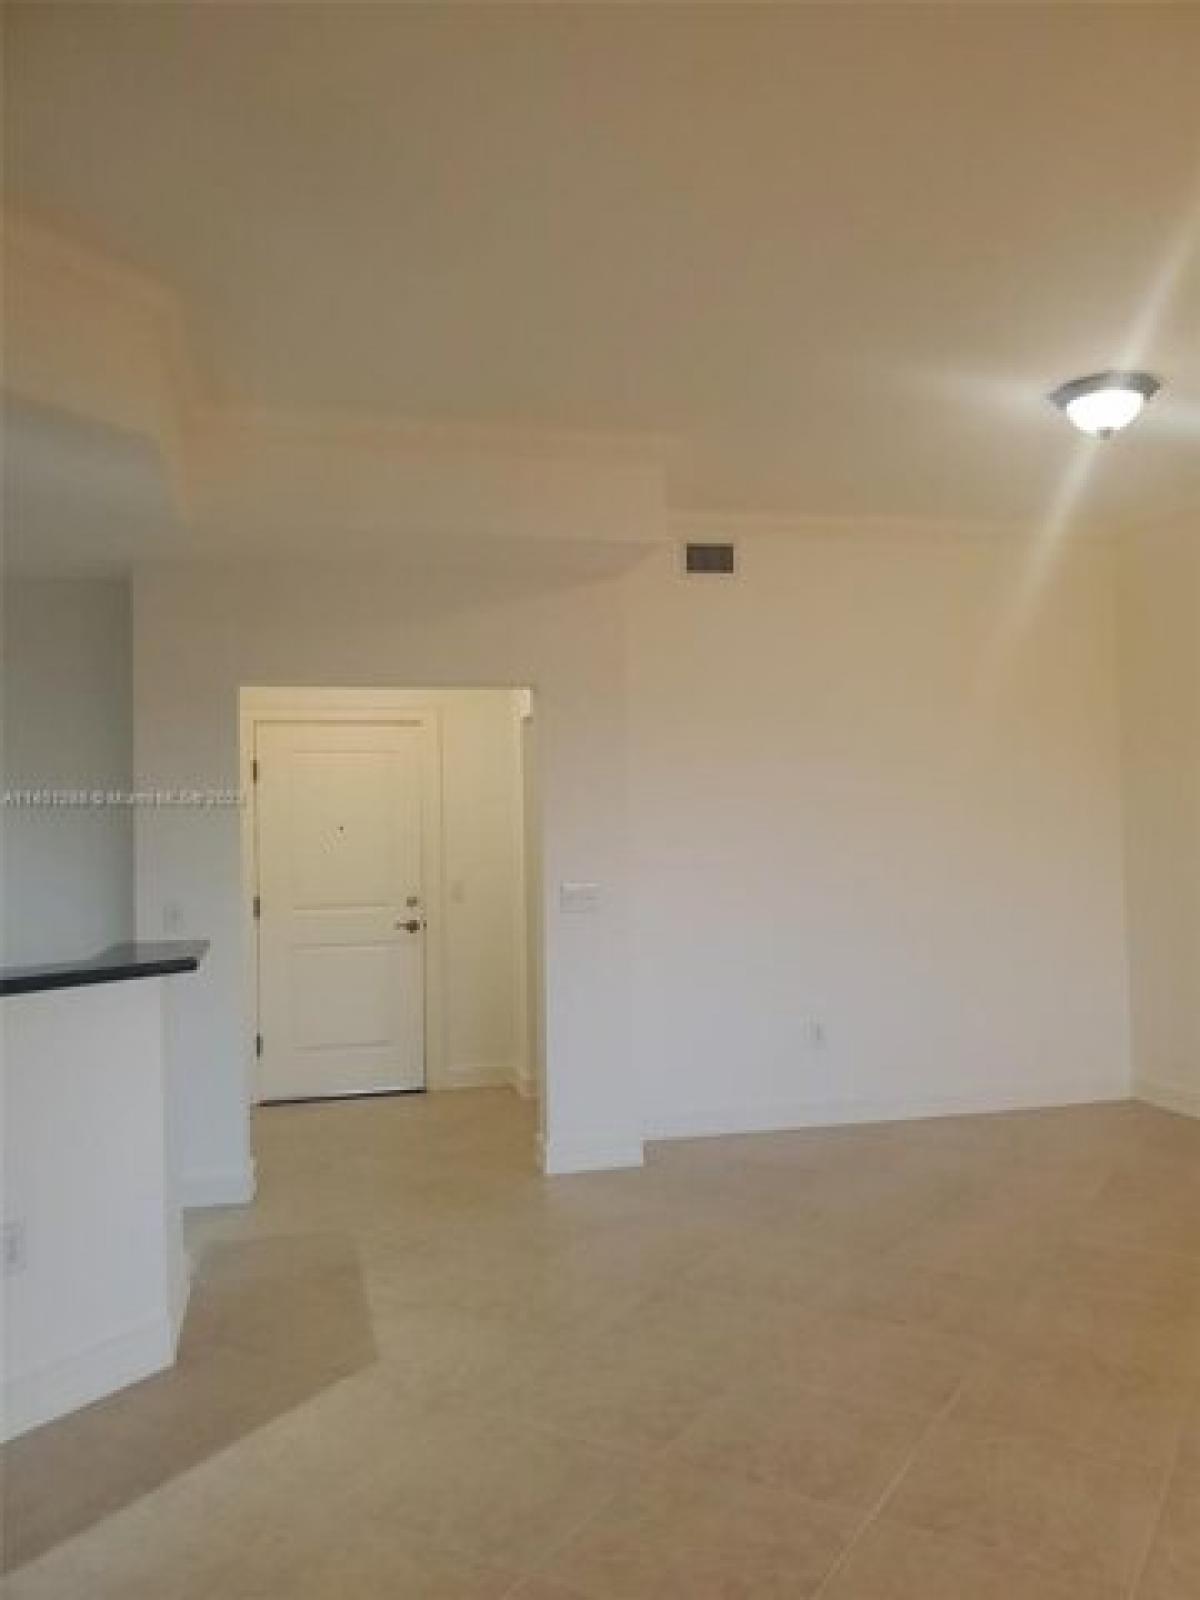 Picture of Home For Rent in Weston, Florida, United States